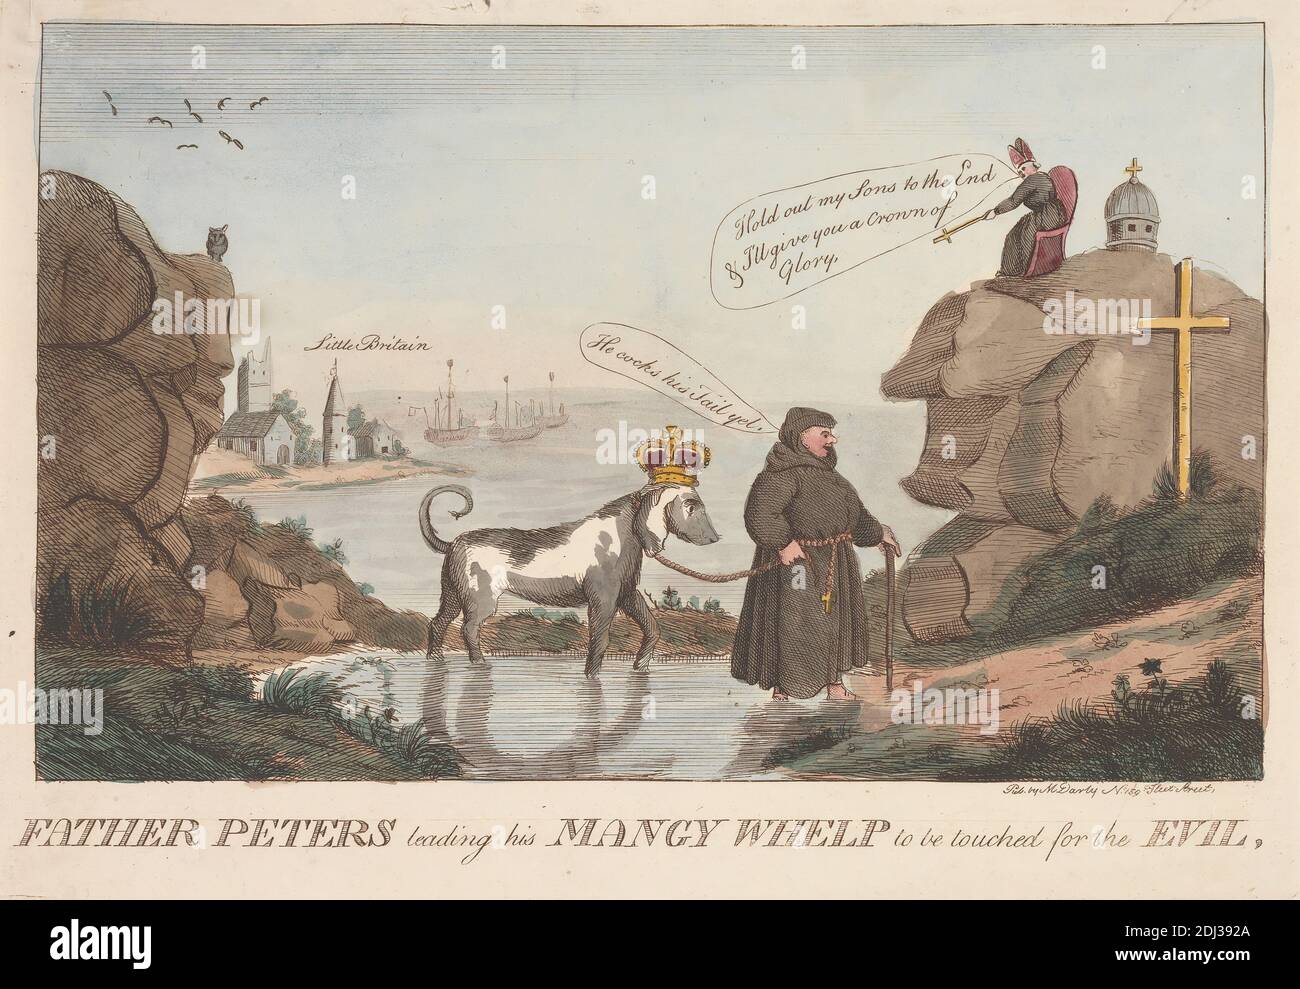 Father Peters Leading his Mangy Whelp to be Touched for the Evil, unknown artist, 1780, Etching, hand-colored, Sheet: 5 11/16 x 9 3/16in. (14.4 x 23.3cm Stock Photo